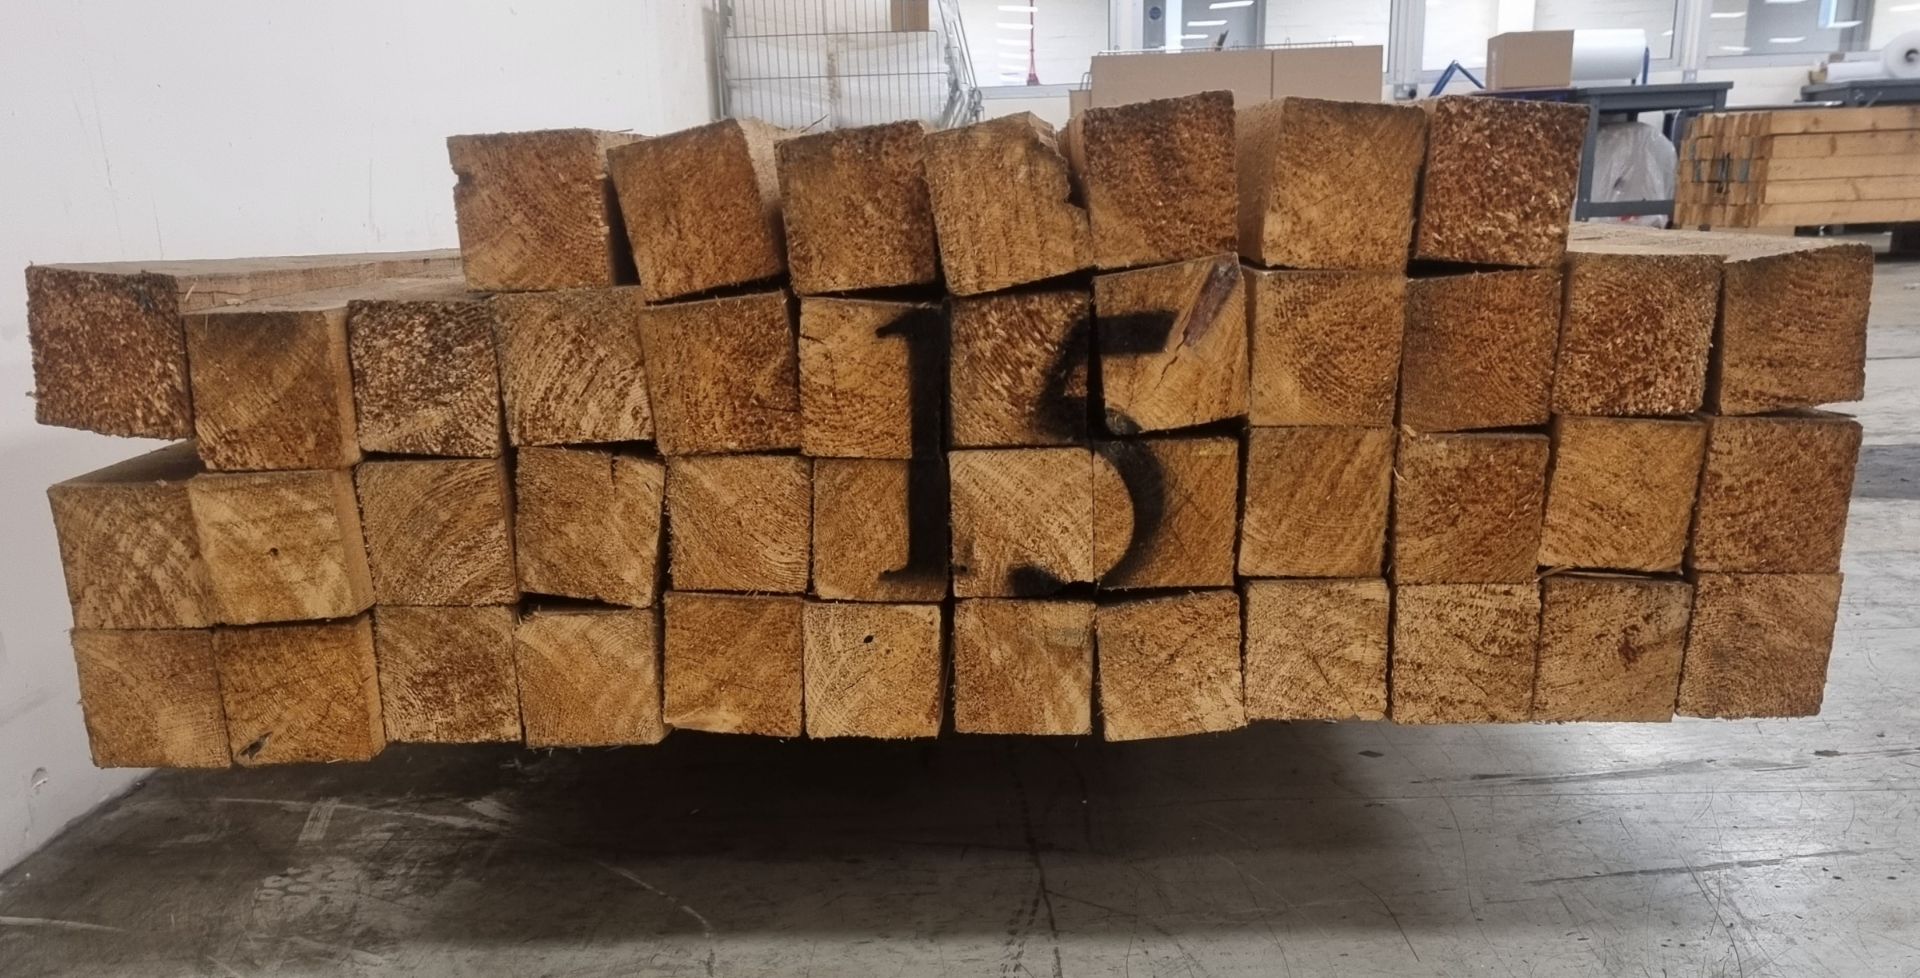 Pallet of 4"x4" (10x10cm) softwood, heat treated and debarked (GBFC-0452 DBHT) L420cm x 43 pcs - Image 4 of 5